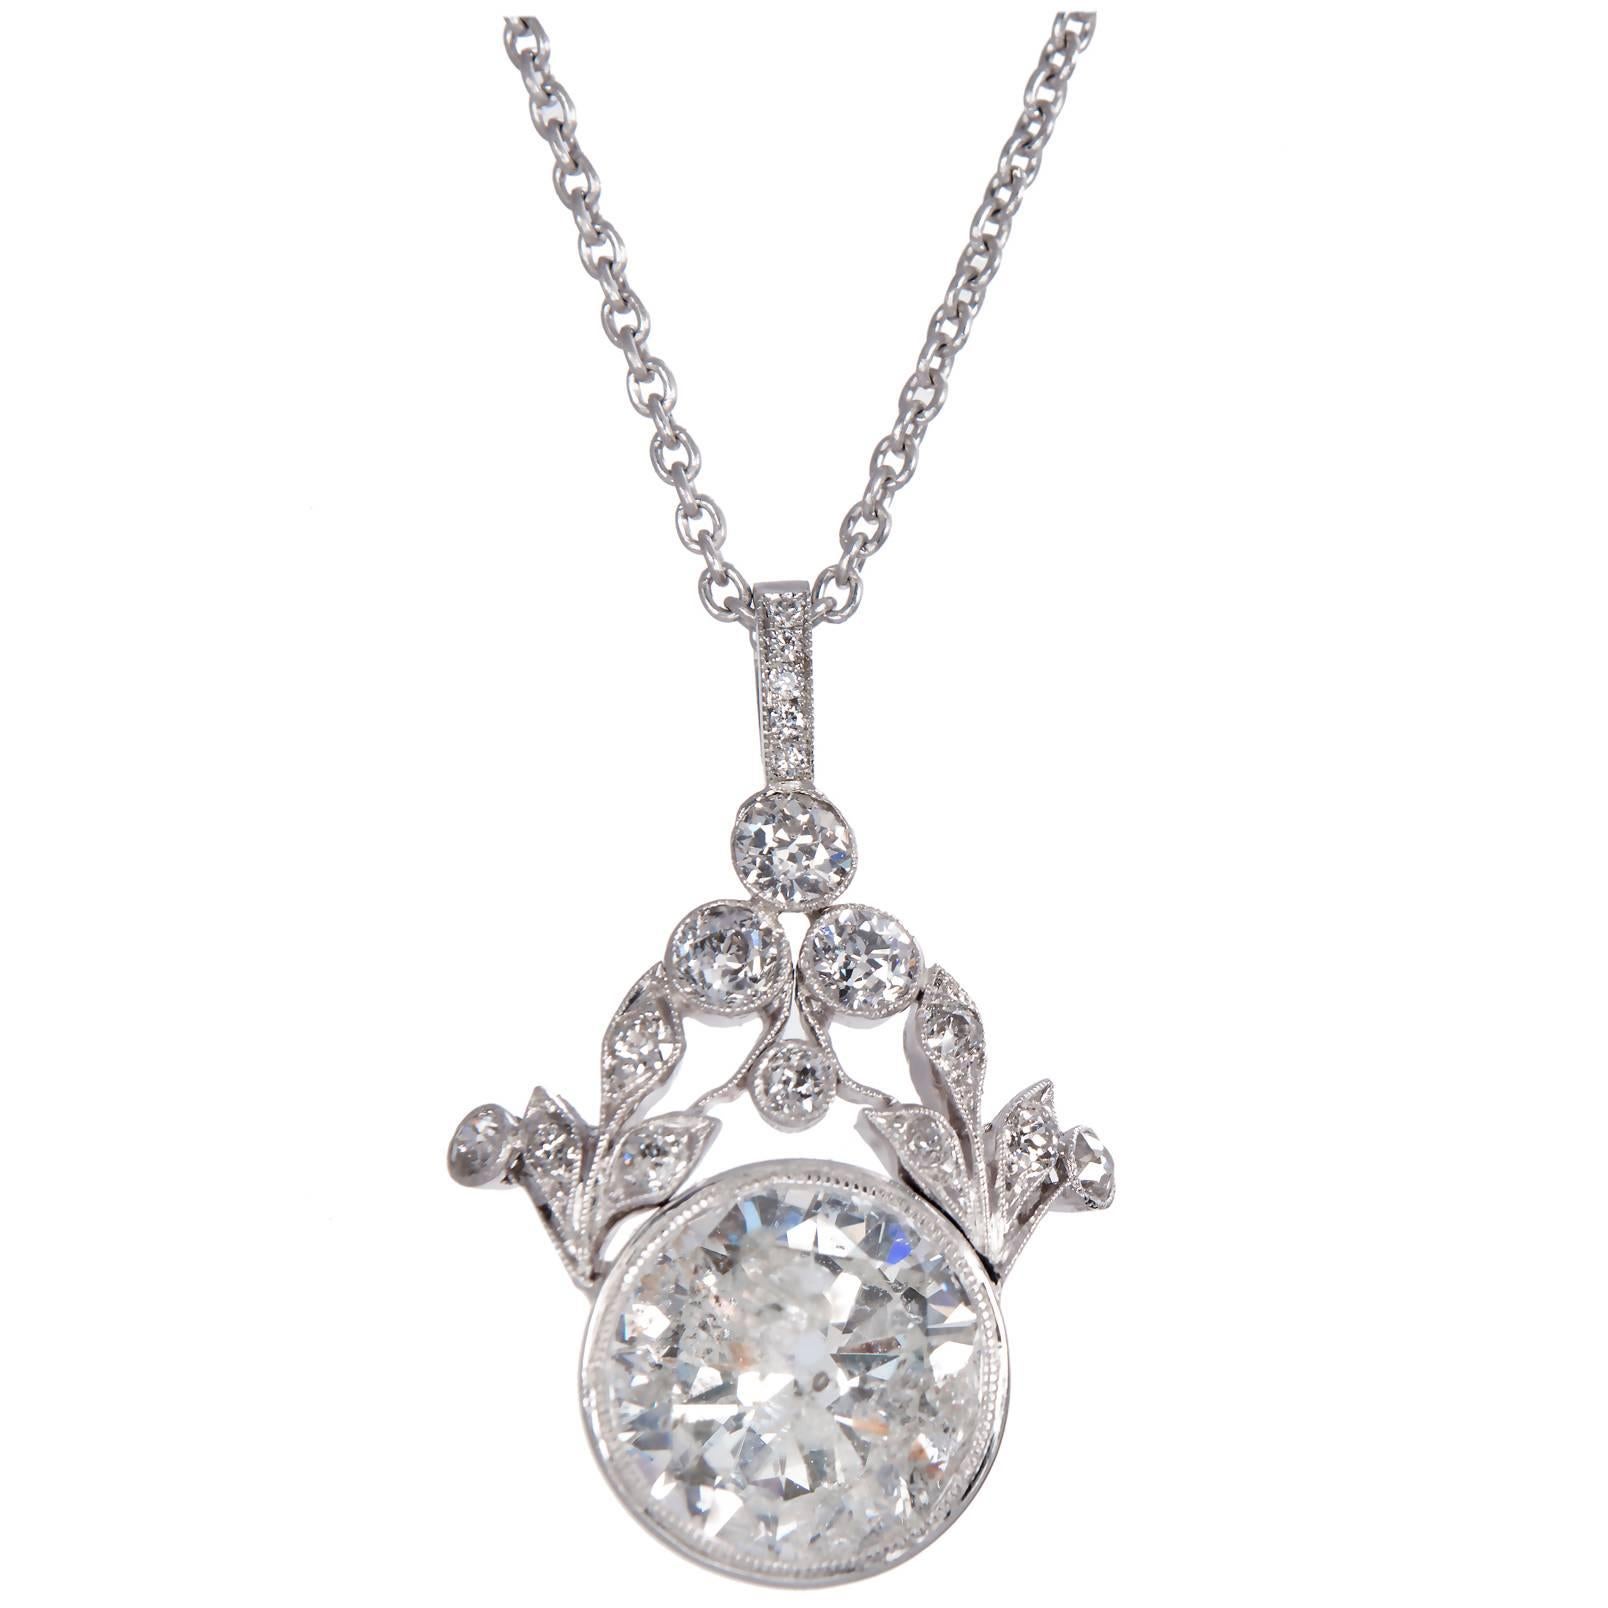 1940s faint grey transitional cut diamond that faces up with a hint of natural color and a few eye visible flaws that are part of the one of a kind character of the pendant. The top is handmade with old European cut diamonds. The pendant and chain